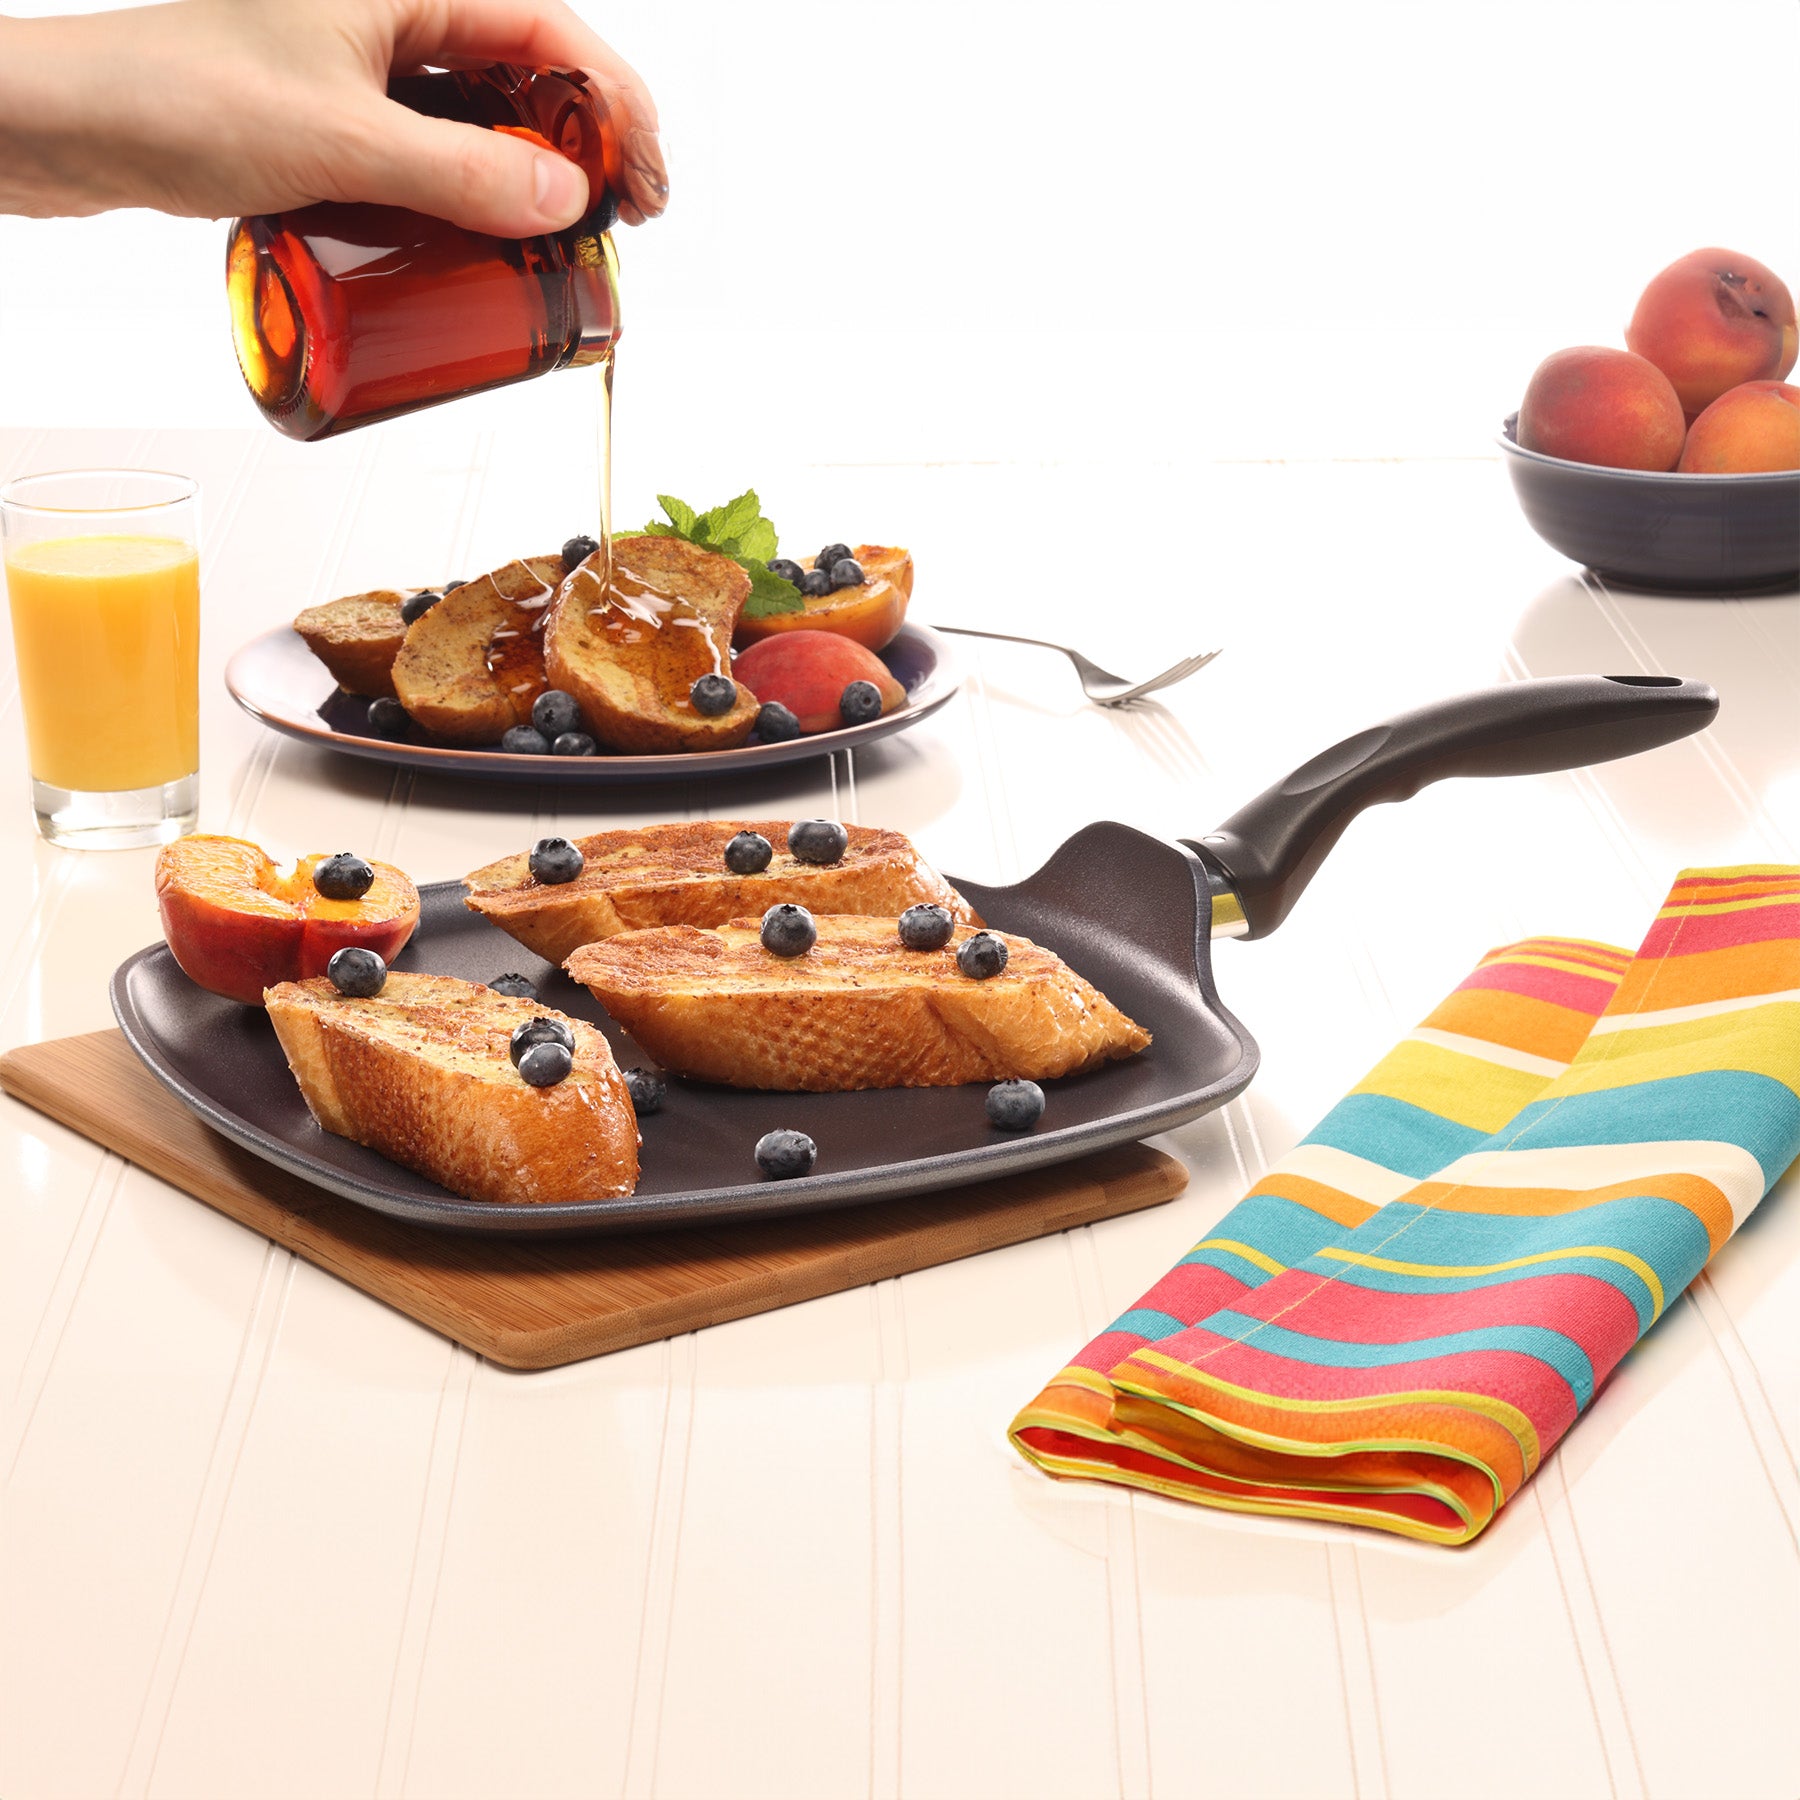 HD Nonstick 11" x 11" Square Griddle - Induction in use on dining room table